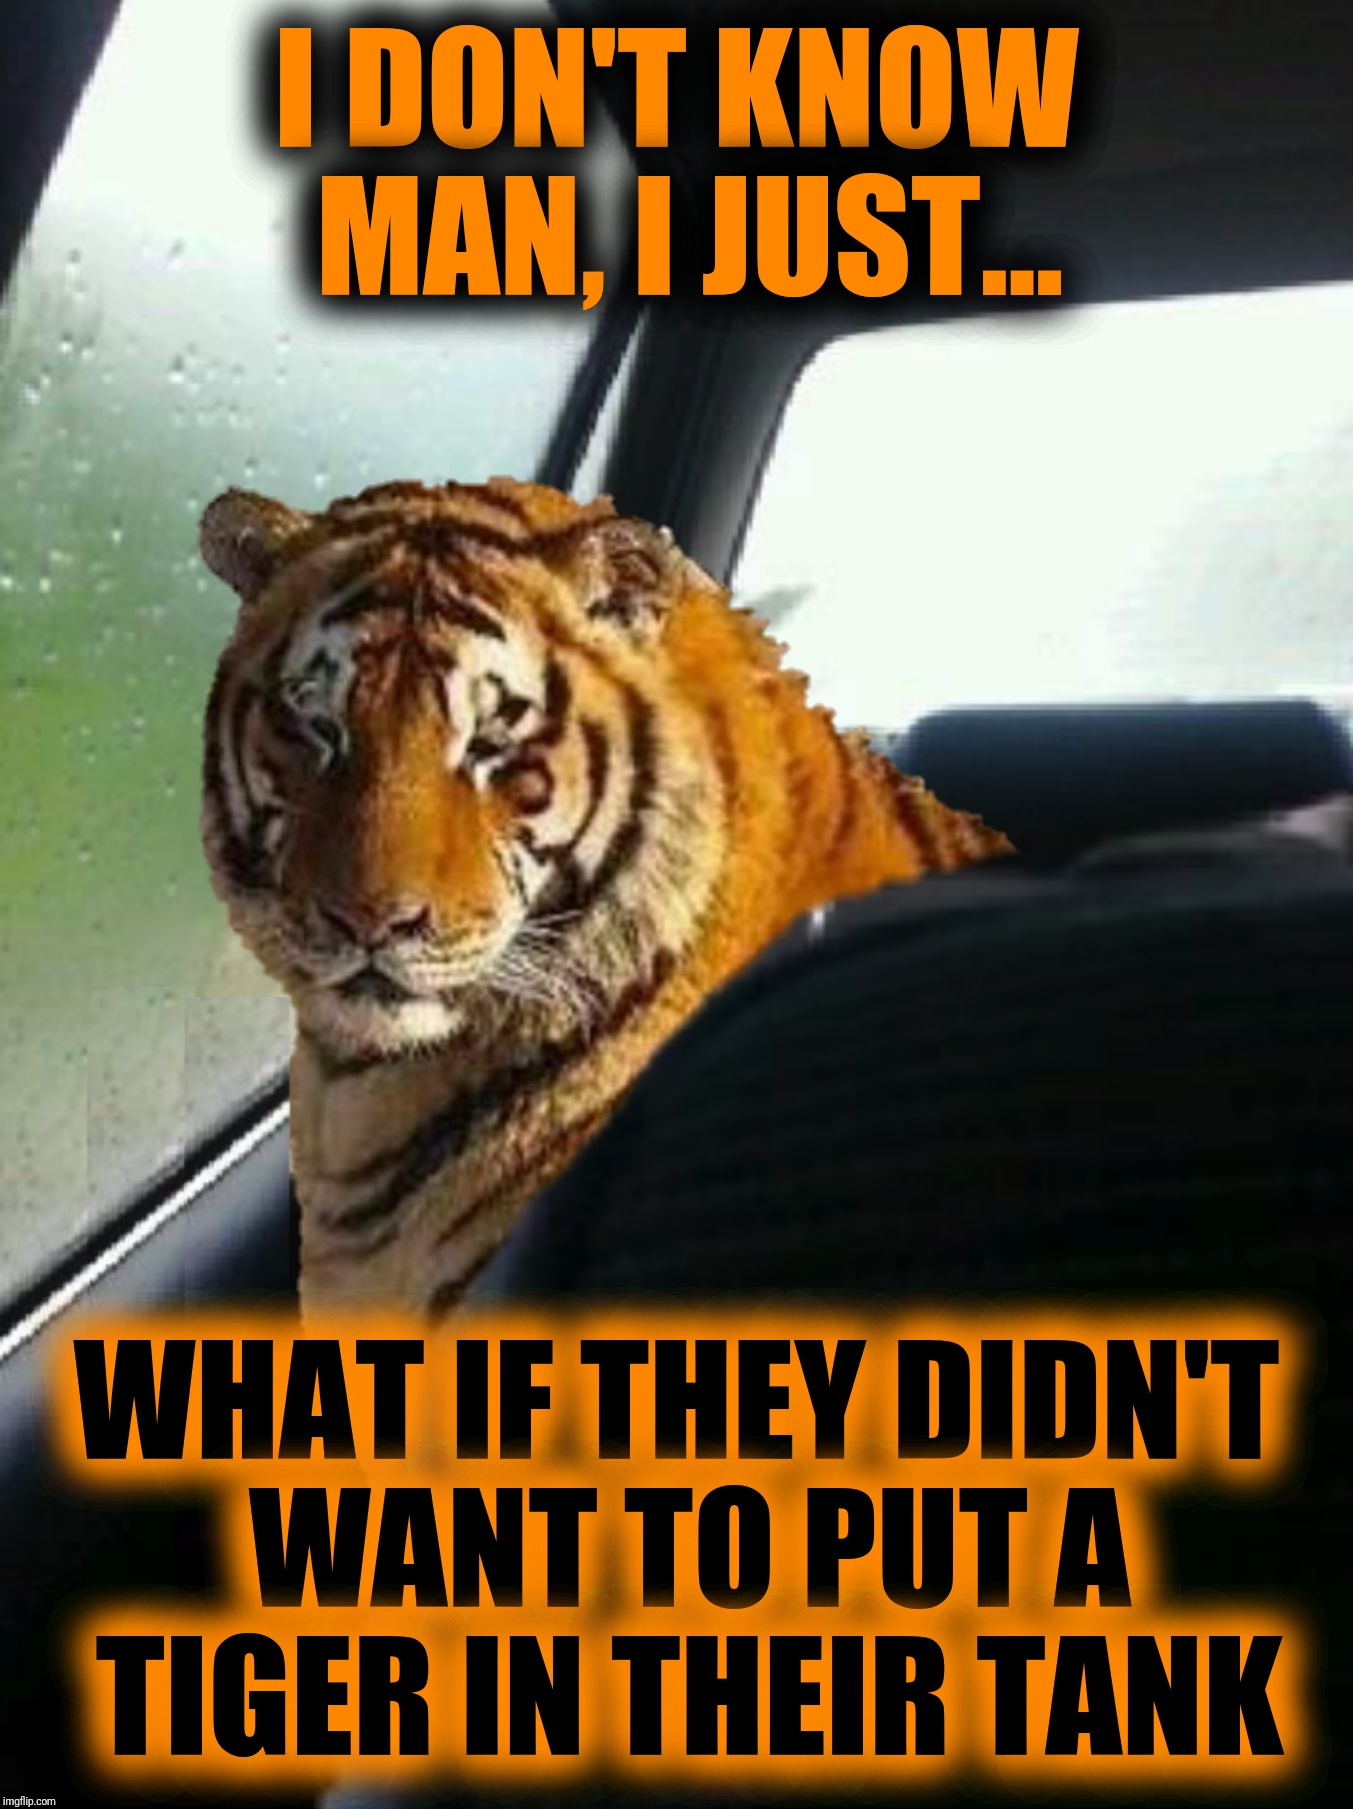 Introspective Tiger is having second thoughts... Tiger Week Jul 29 - Aug 5, A TigerLegend1046 event | I DON'T KNOW MAN, I JUST... WHAT IF THEY DIDN'T WANT TO PUT A TIGER IN THEIR TANK | image tagged in introspective tiger,esso,vintage ads,tiger week,tiger week 2018,tigerlegend1046 | made w/ Imgflip meme maker